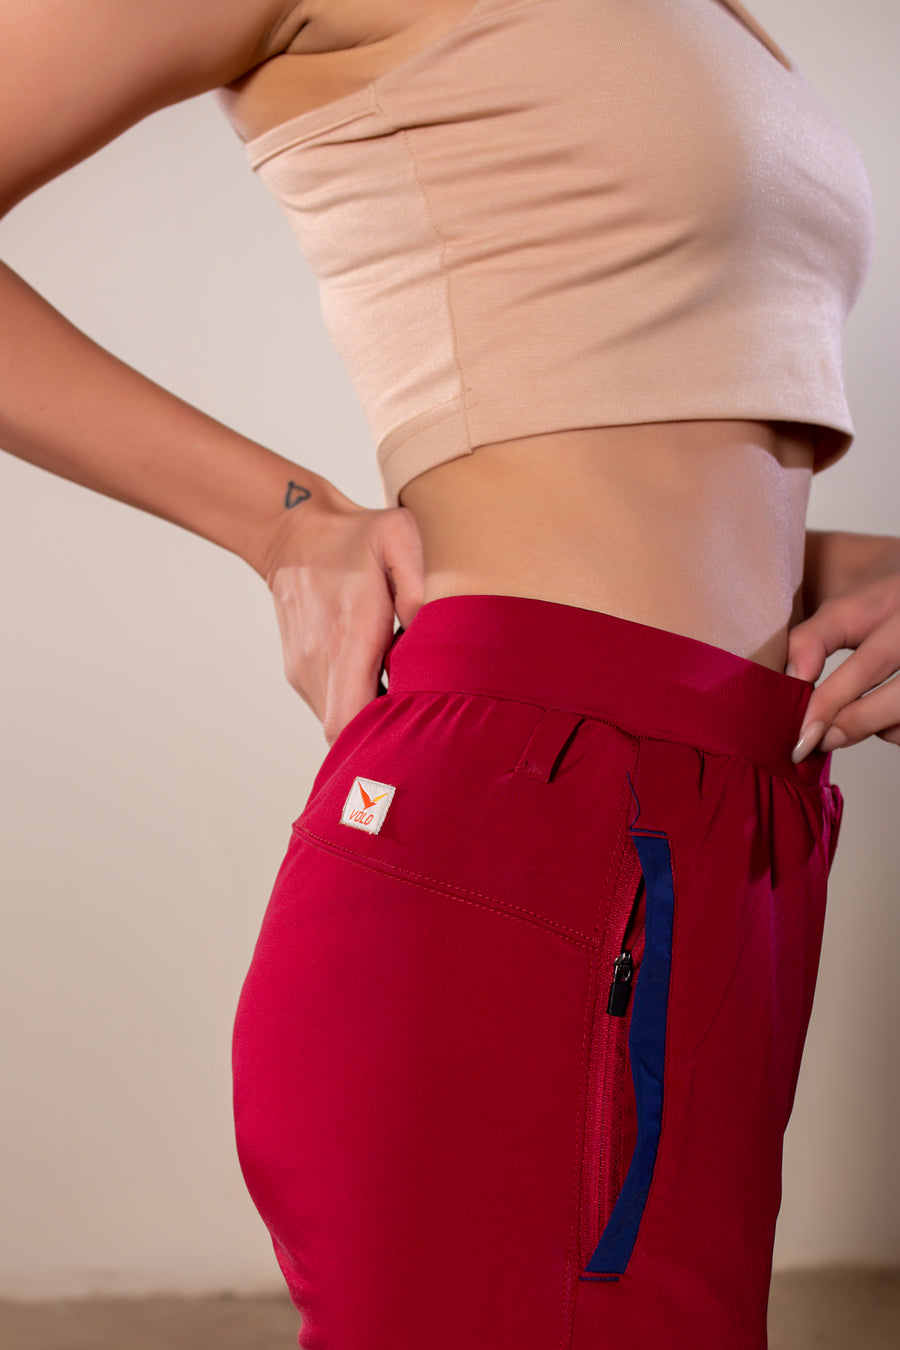 Women's Wanderlust Pant Maroon | VOLO Apparel | These pants are designed to give you wanderlust, an ultralight super durable athletic pant with a five pocket design, a 3 point gusset for all your movements and a high ankle tapered bottom. The revolutional Italian nylon is patented with UPF 50 protection and extreme breathability. The one pant to go everywhere and do everything!